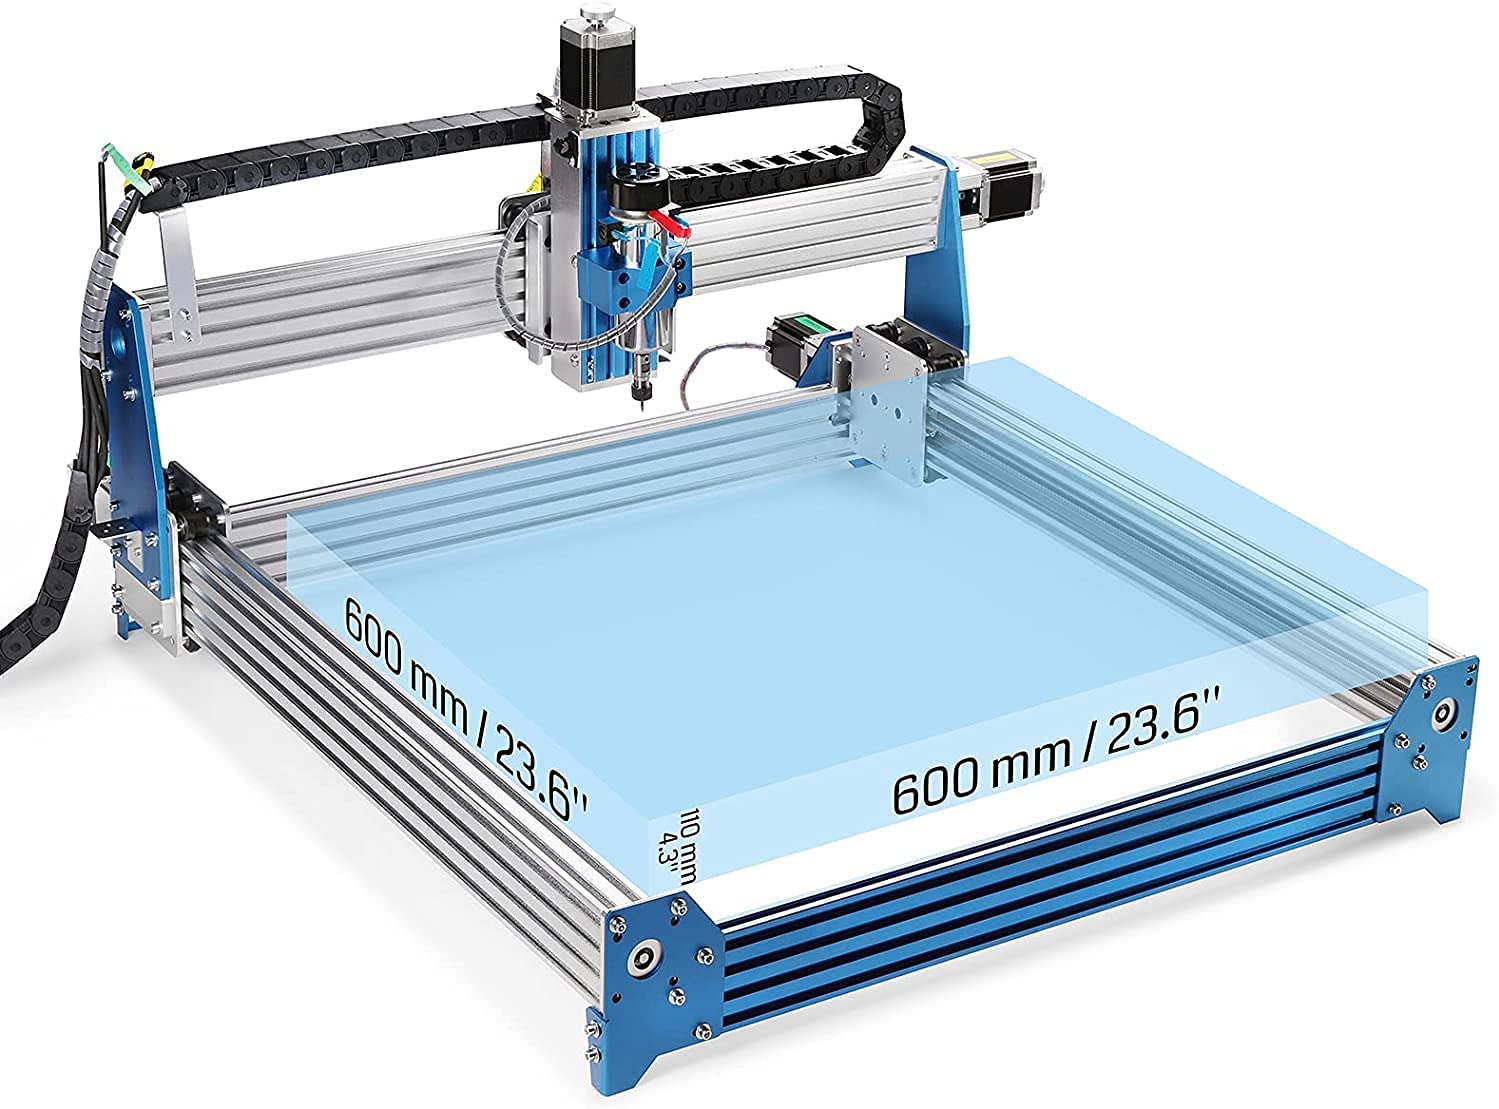 Genmitsu 24” x 24” (600 x 600mm) XY-Axis Extension Upgraded Accessories Kit for CNC Router Machine PROVerXL 4030